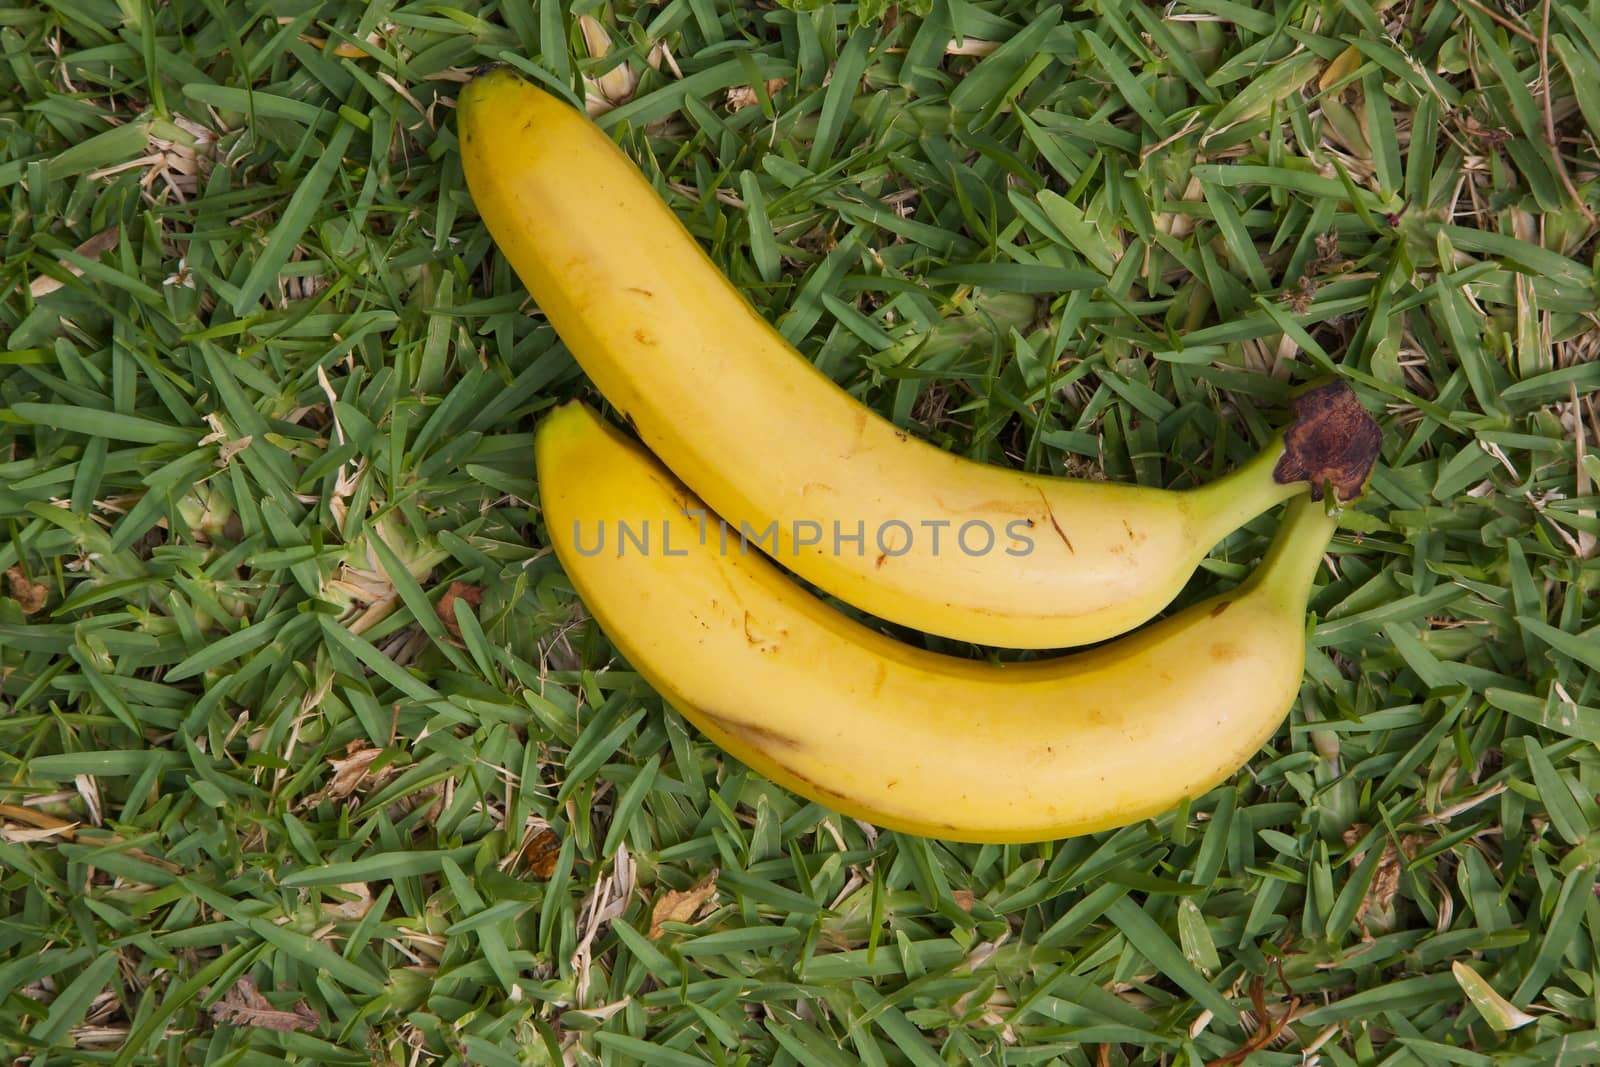 Two bananas on the grass by tolikoff_photography